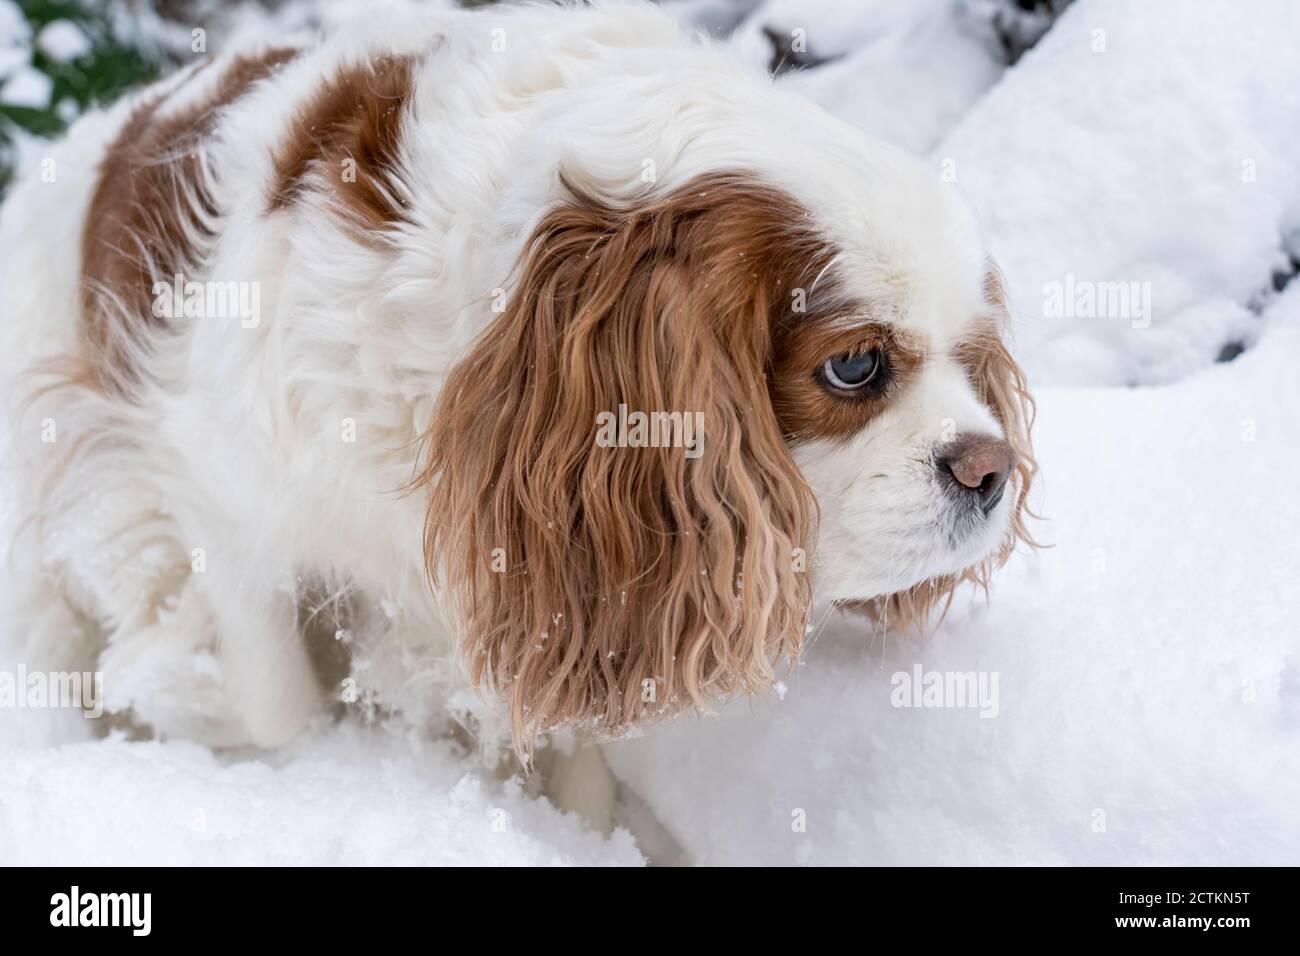 Issaquah, Washington, USA.  'Mandy', an elderly Cavalier King Charles Spaniel, determined to make her own path in the snow.  (PR) Stock Photo